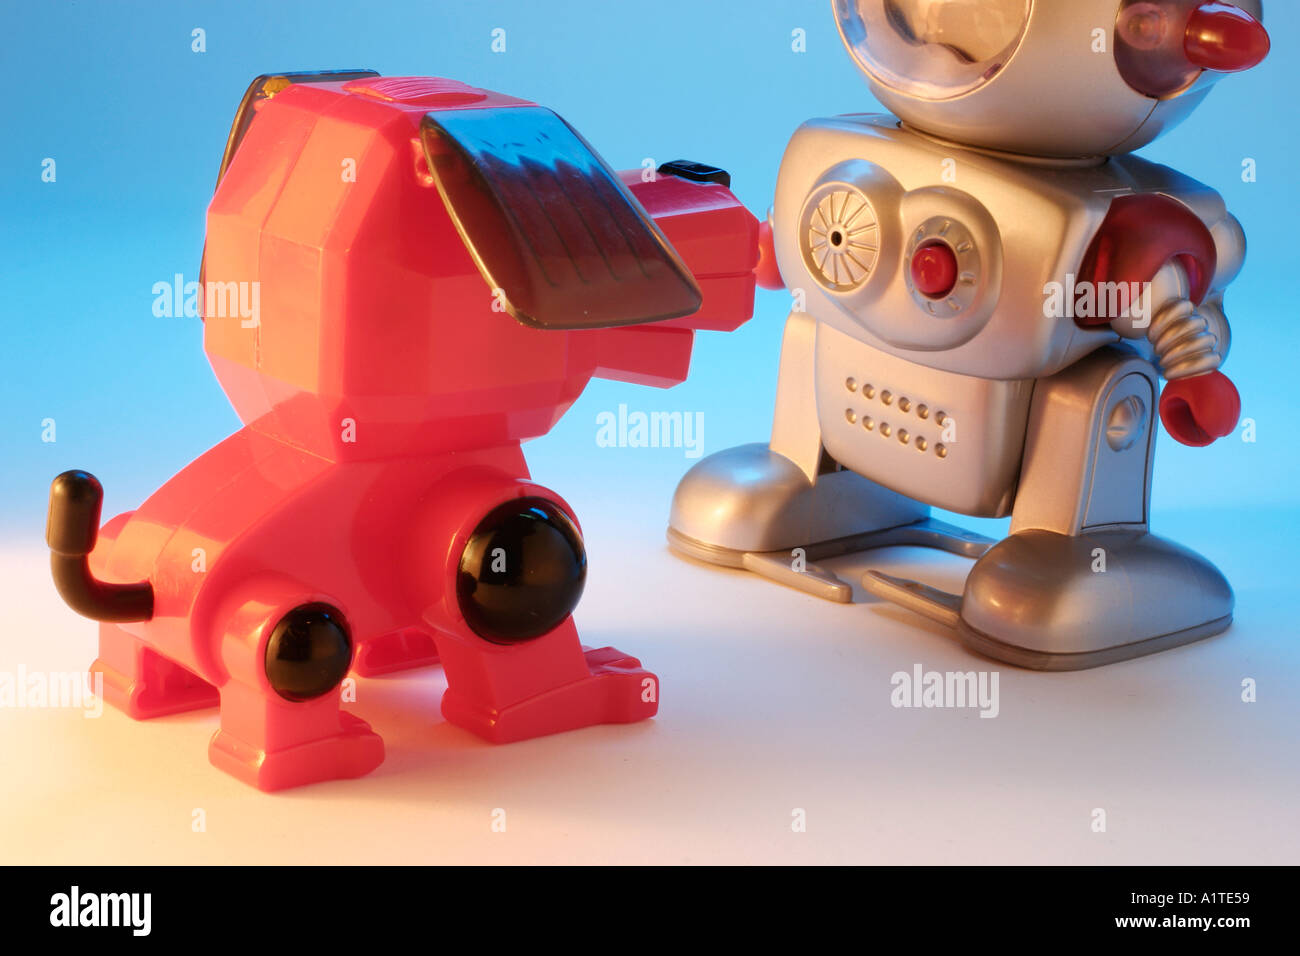 Toy Robot and Robot Dog Stock Photo